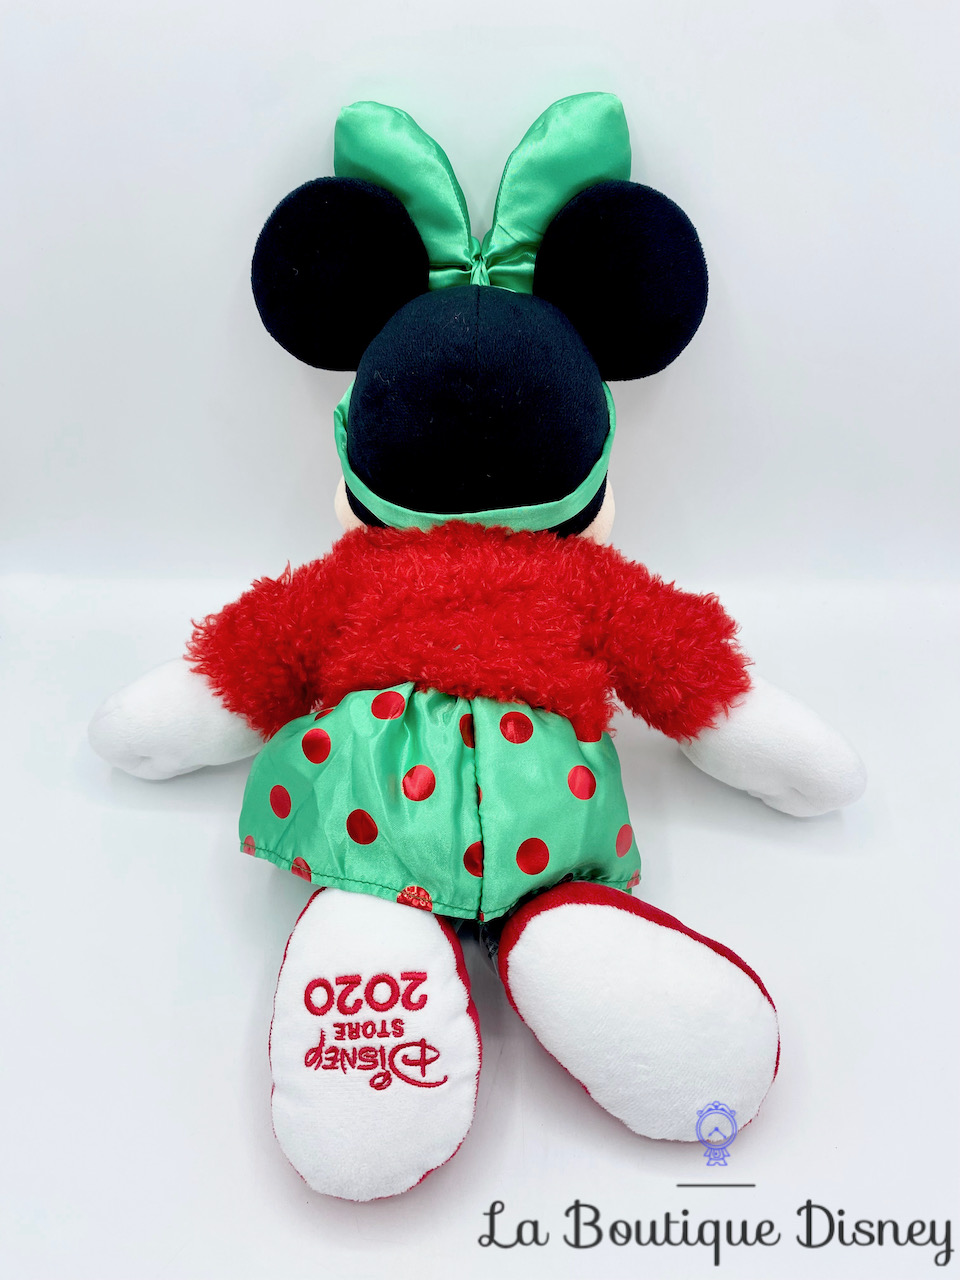 Peluche Minnie Mouse Disney Store 2012 robe rouge ailes 44 cm